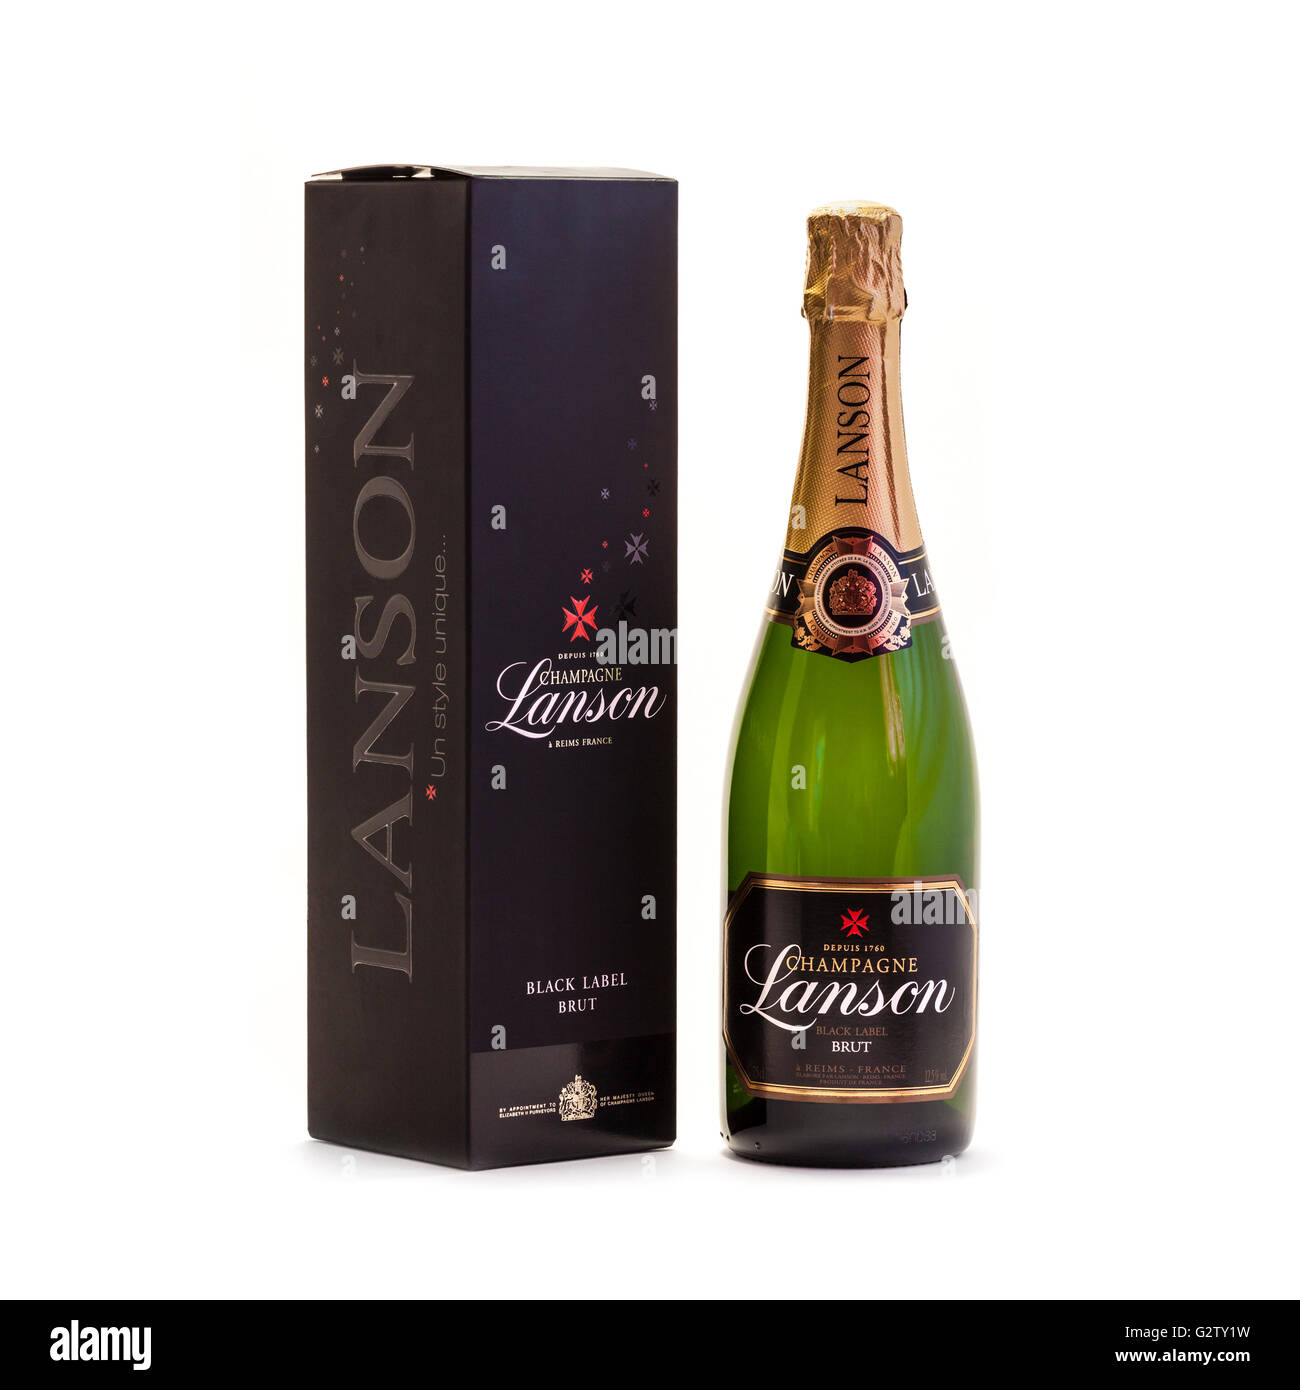 Bottle of Lanson Black Label Brut Champagne with Gift Box. Lanson was founded in 1760 by a magistrate, François Delamotte. Stock Photo